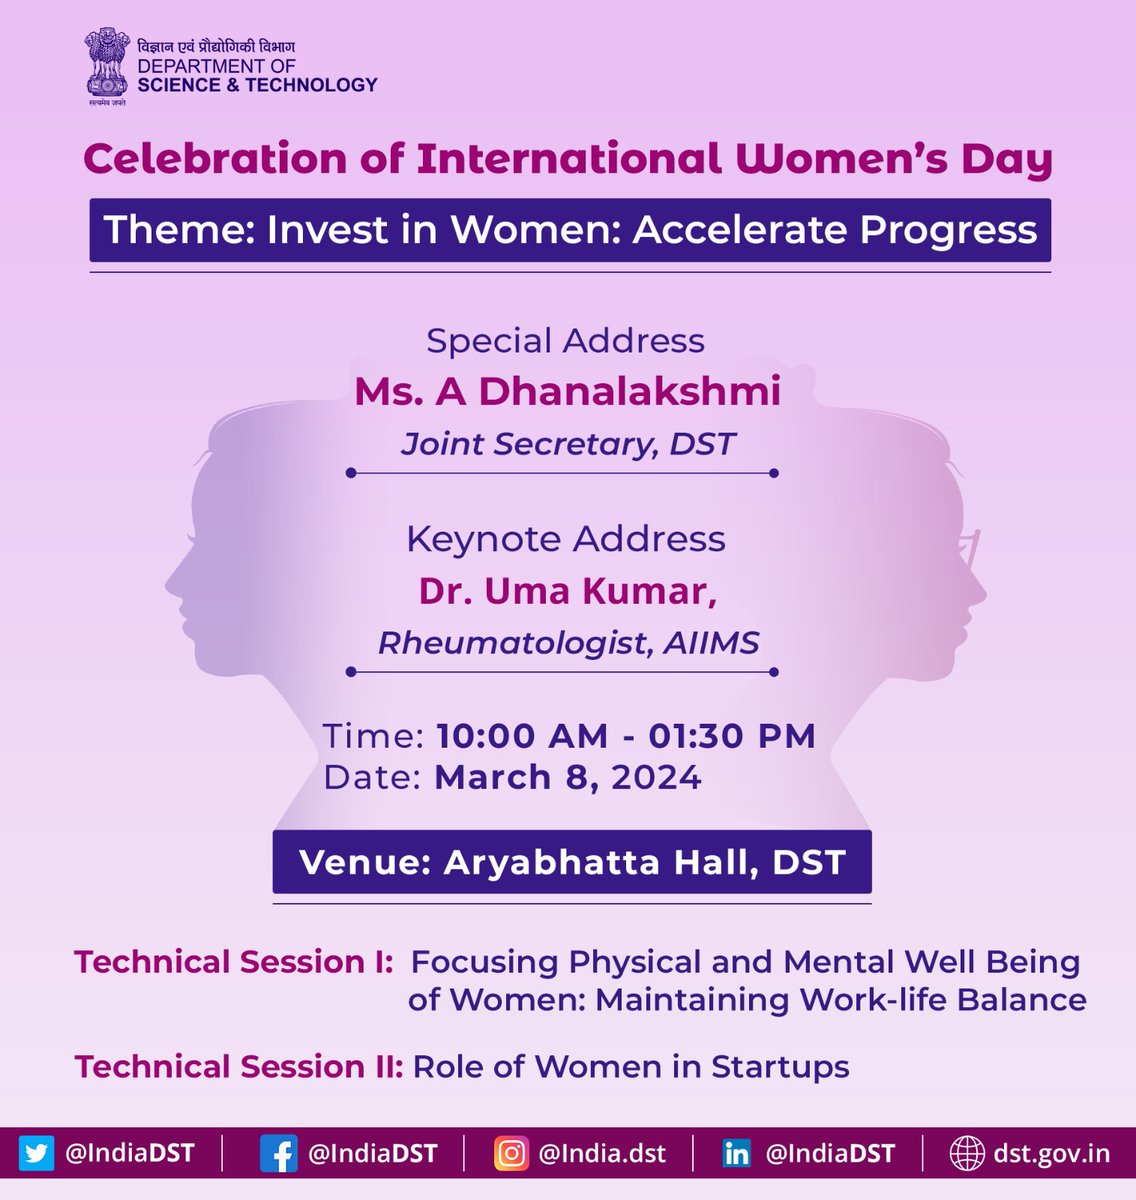 WISE-KIRAN Division of @IndiaDST is organising an event to celebrate #InternationalWomensDay with lectures of experts on women's health, physical & mental wellbeing & women's startup meet. ⏰ 10 AM 📅 8 March 2024 📌 Technology Bhawan, N Delhi Join on : youtube.com/live/F8hesWpwW…